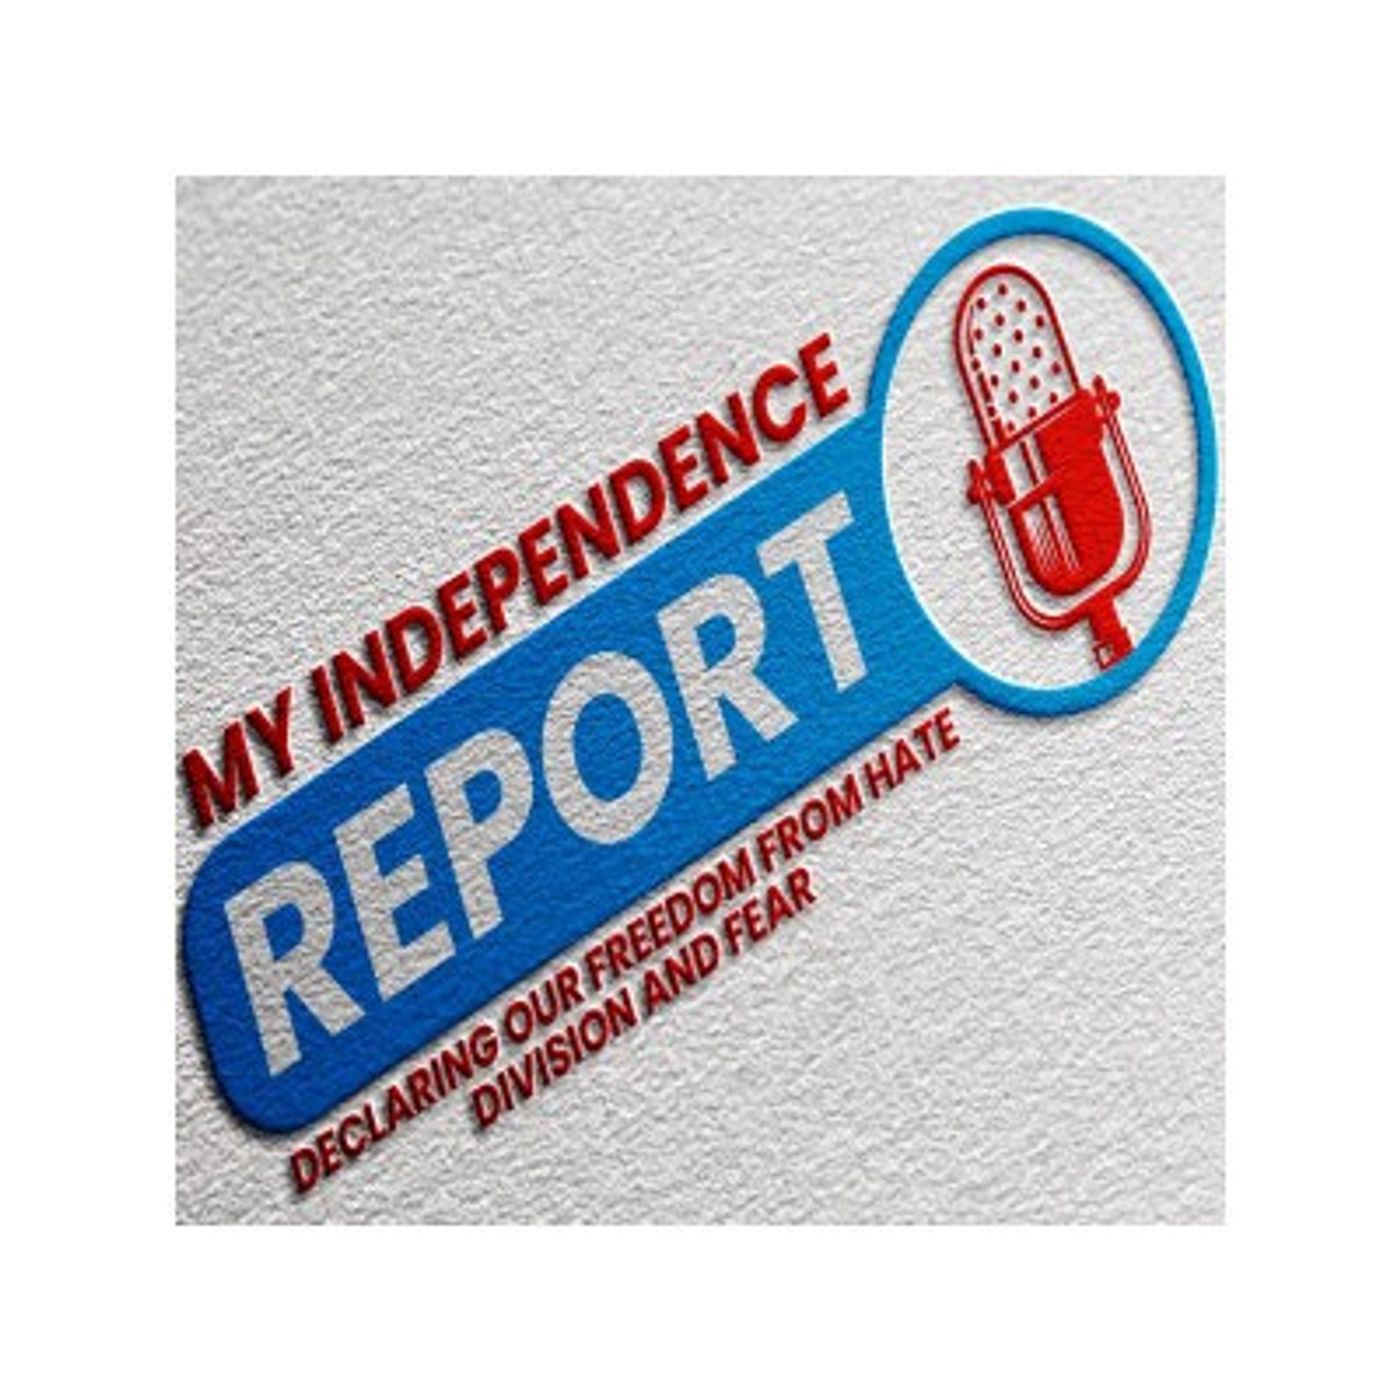 35: Steve Snyder is interviewed on My Independence Report